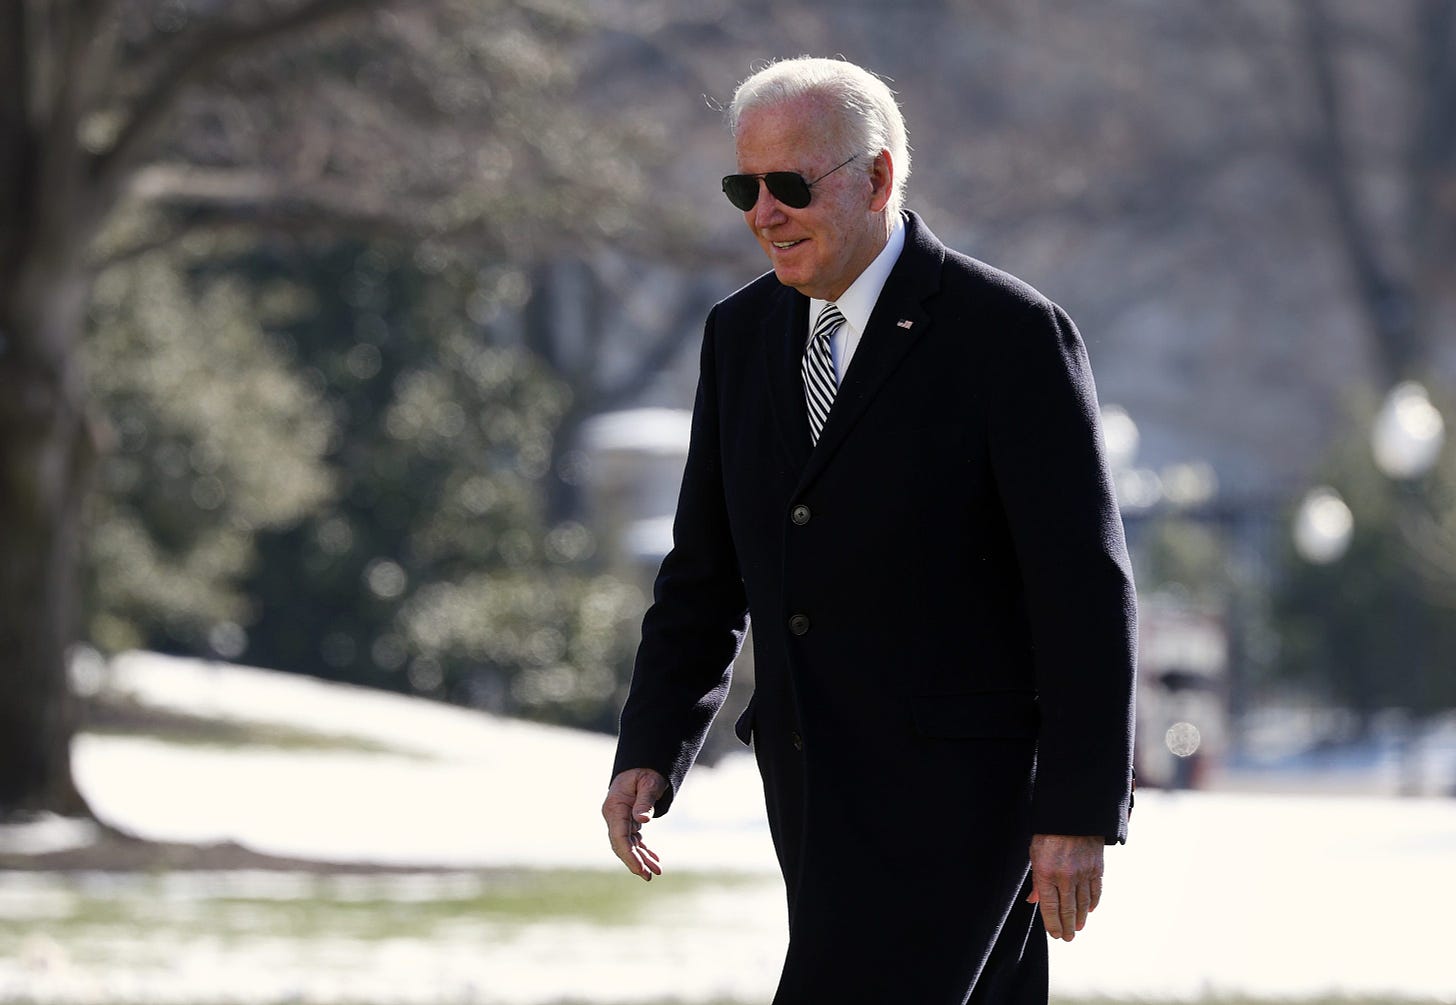 U.S. President Joe Biden at the White House, January 22, 2024. (Photo by Kevin Dietsch/Getty Images.)